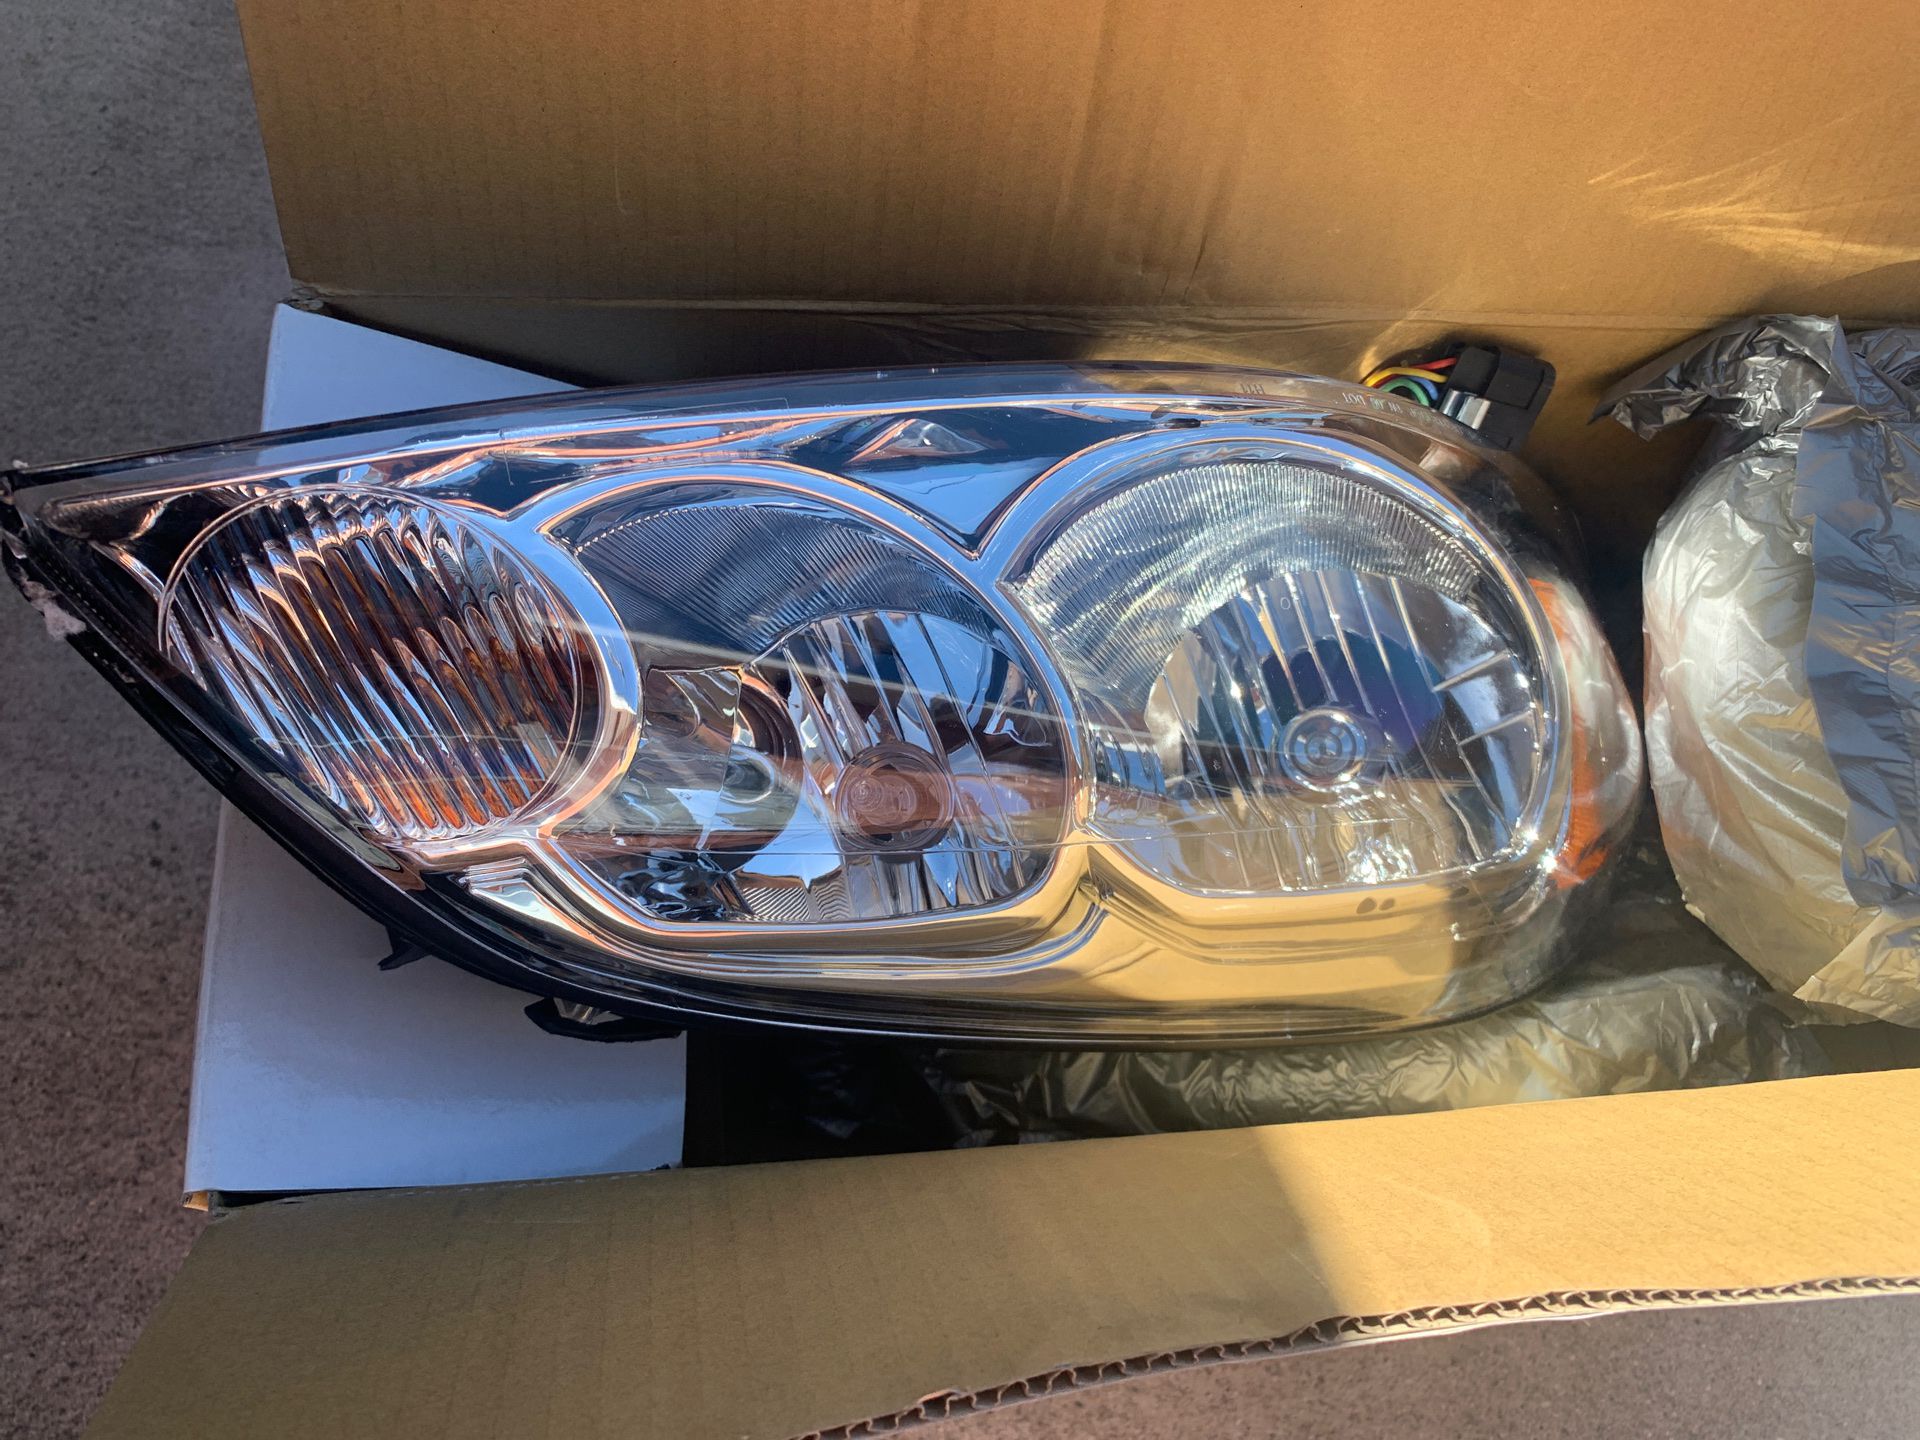 2 headlights for a 2014 imánala limited used for 2 months perfect conditions